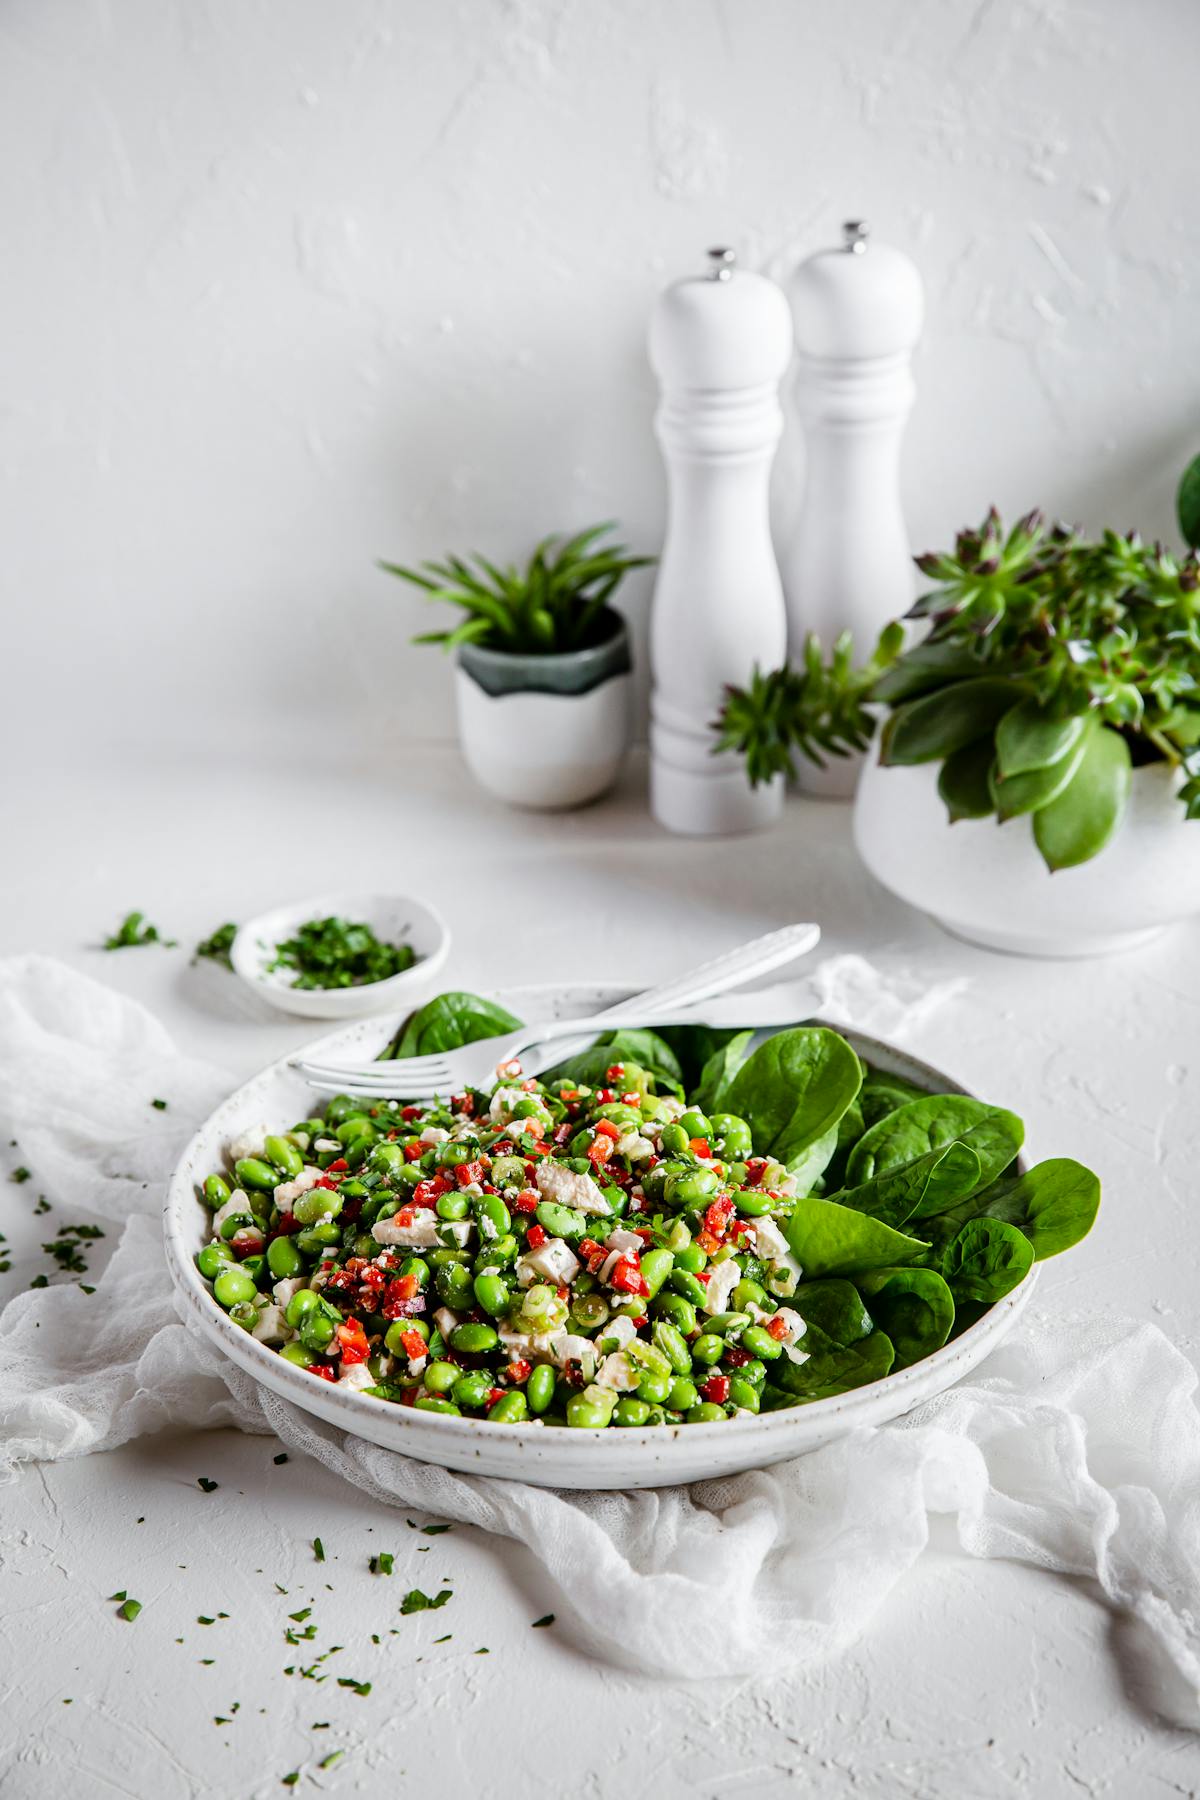 High-protein vegetarian plate with edamame and feta cheese